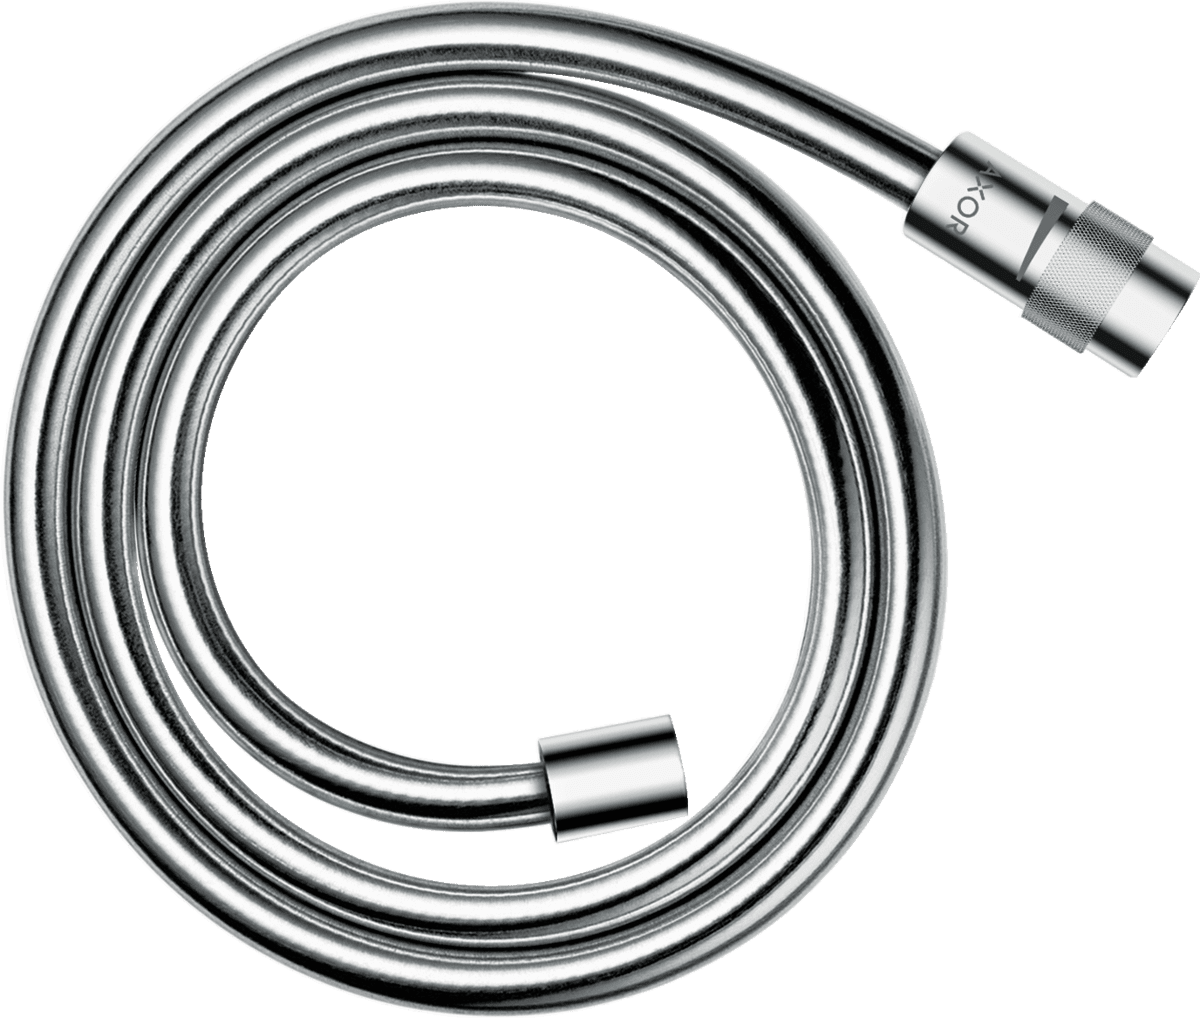 HANSGROHE Shower hose 1.25 m with volume control #28127820 - Brushed Nickel resmi